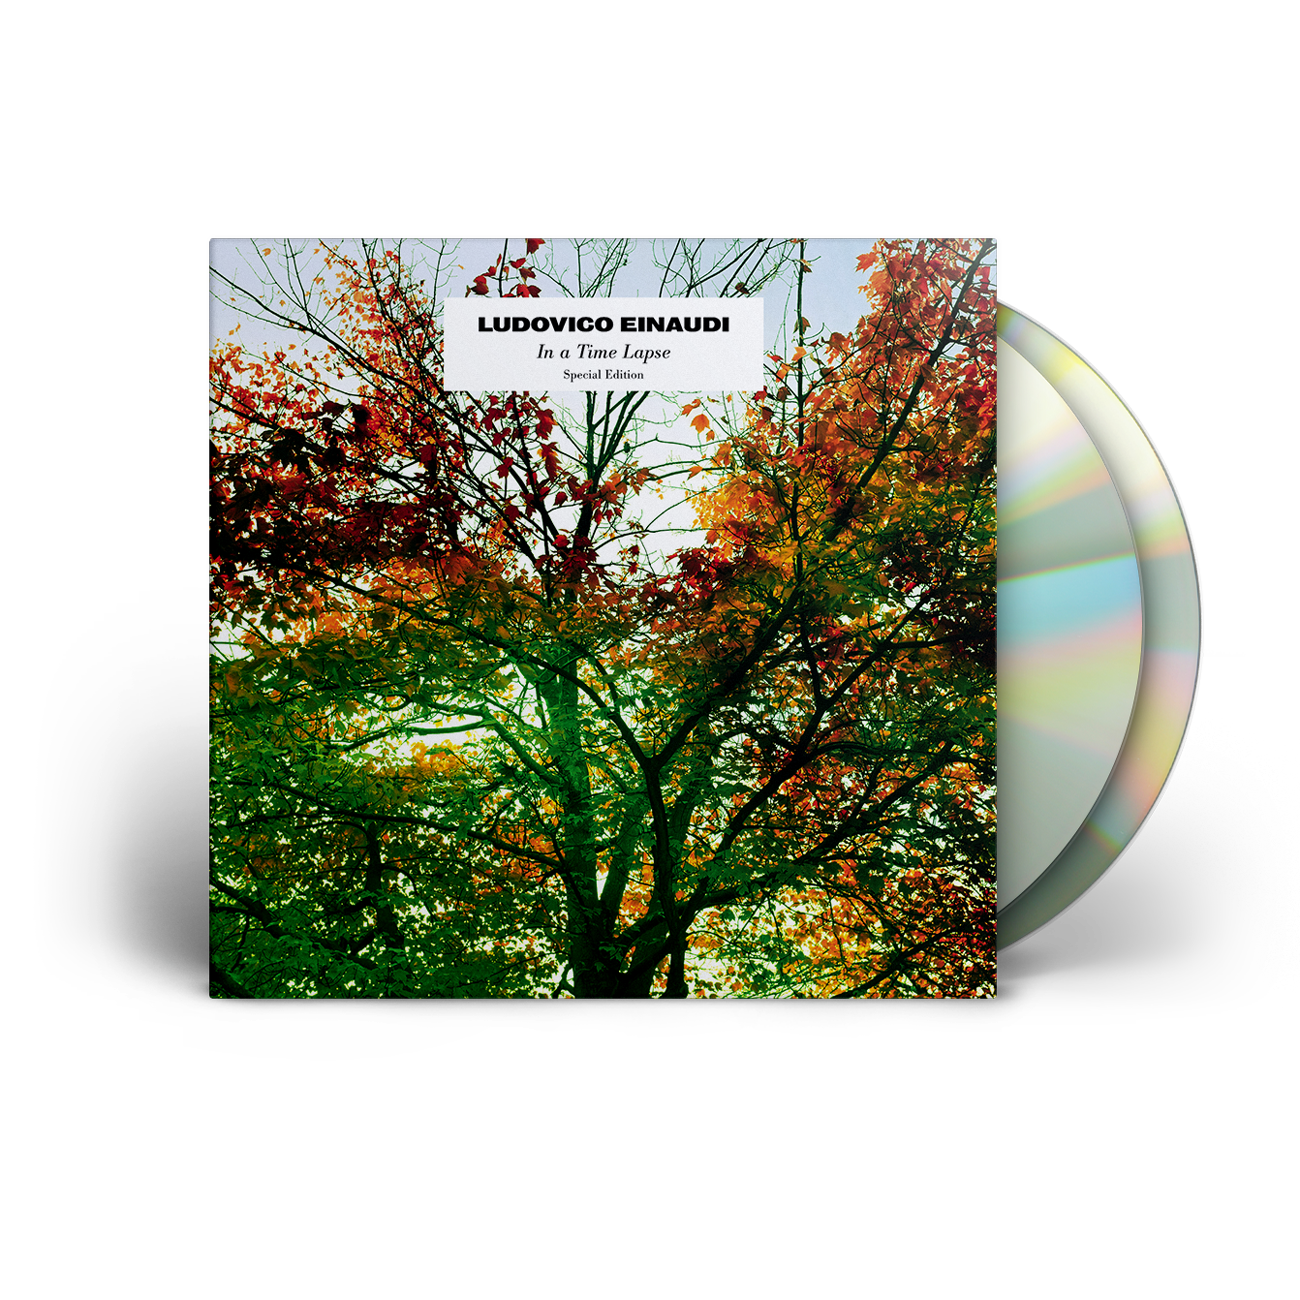 Ludovico Einaudi - In a Time Lapse 2CD Special Edition